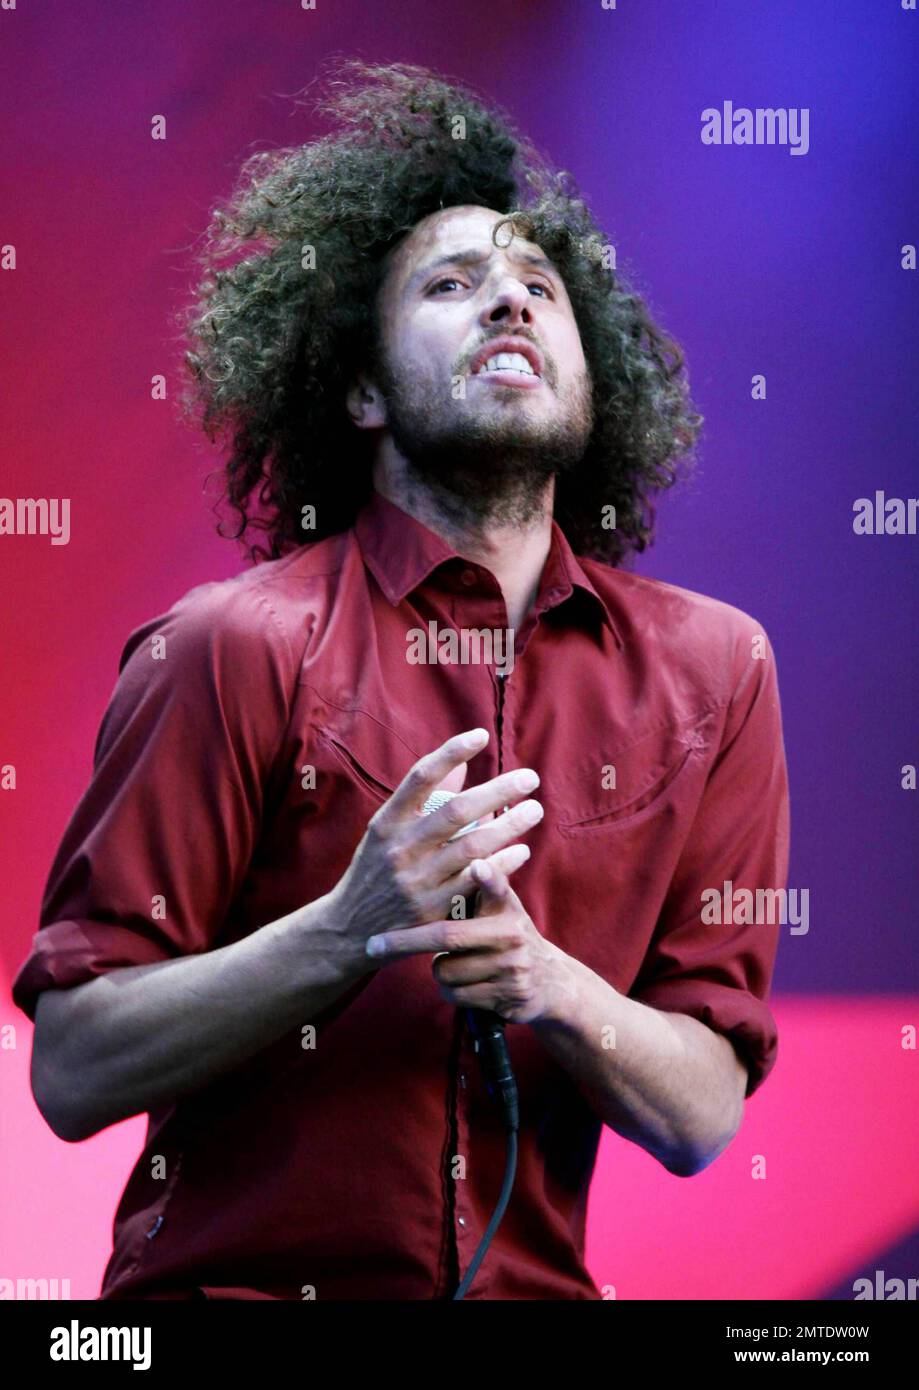 Zack de la Roche of the American rap rock band Rage Against the Machine  performs live during the 2010 Download Festival held at Donington Park in  Derby. The group, who went on